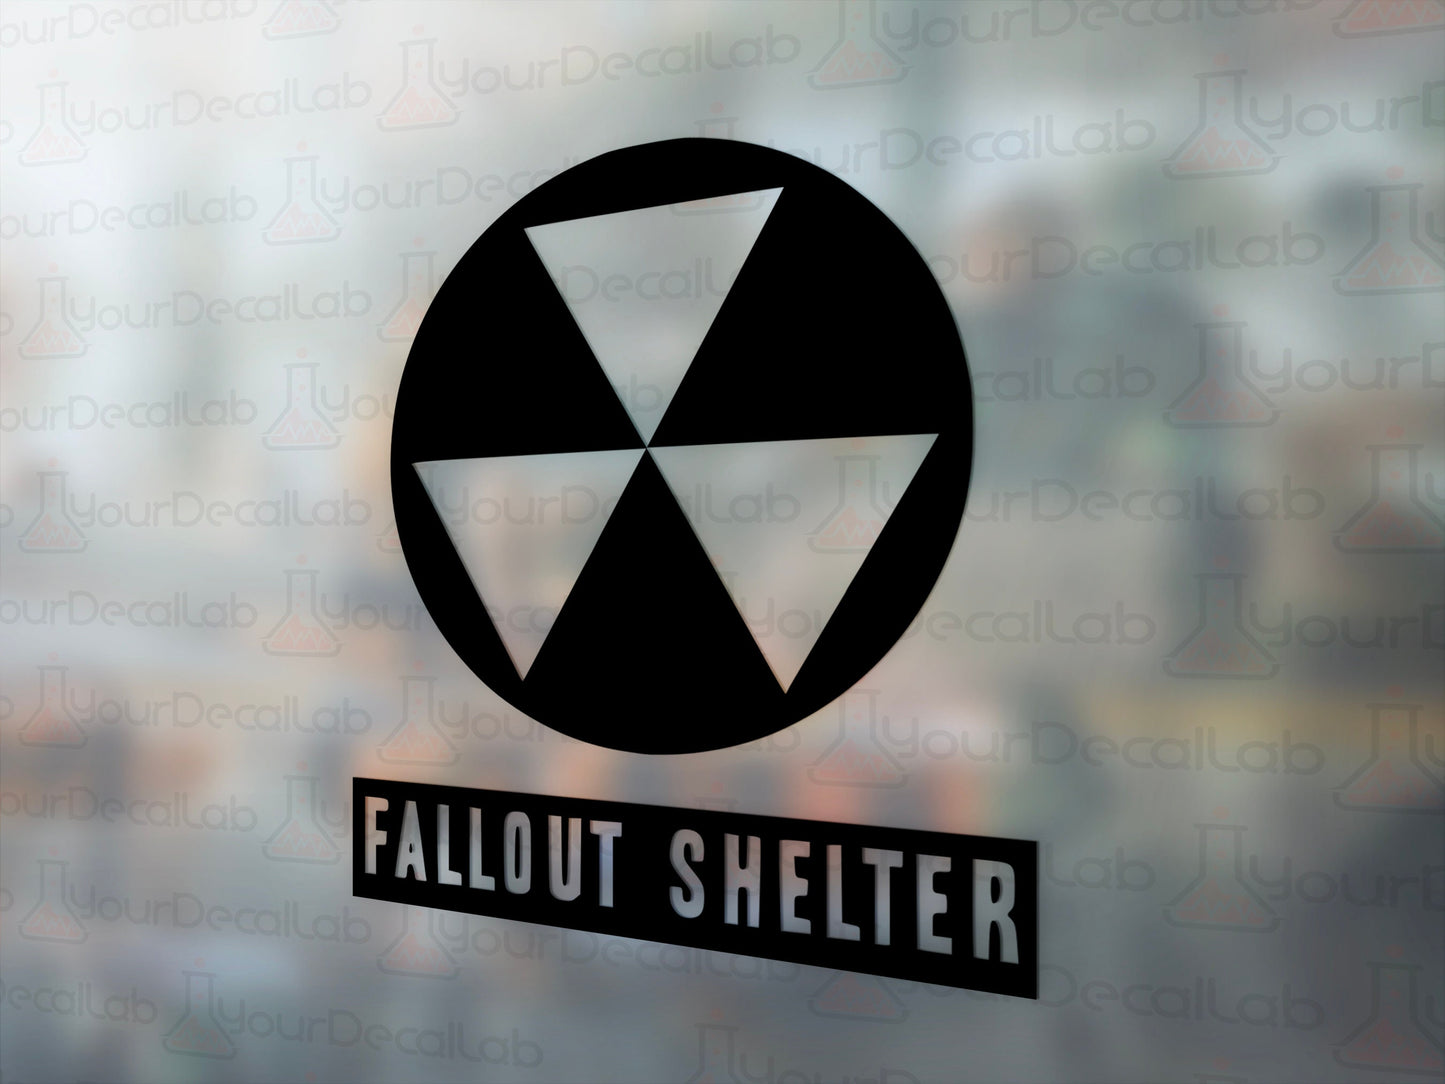 Fallout Shelter Decal - Many Colors & Sizes